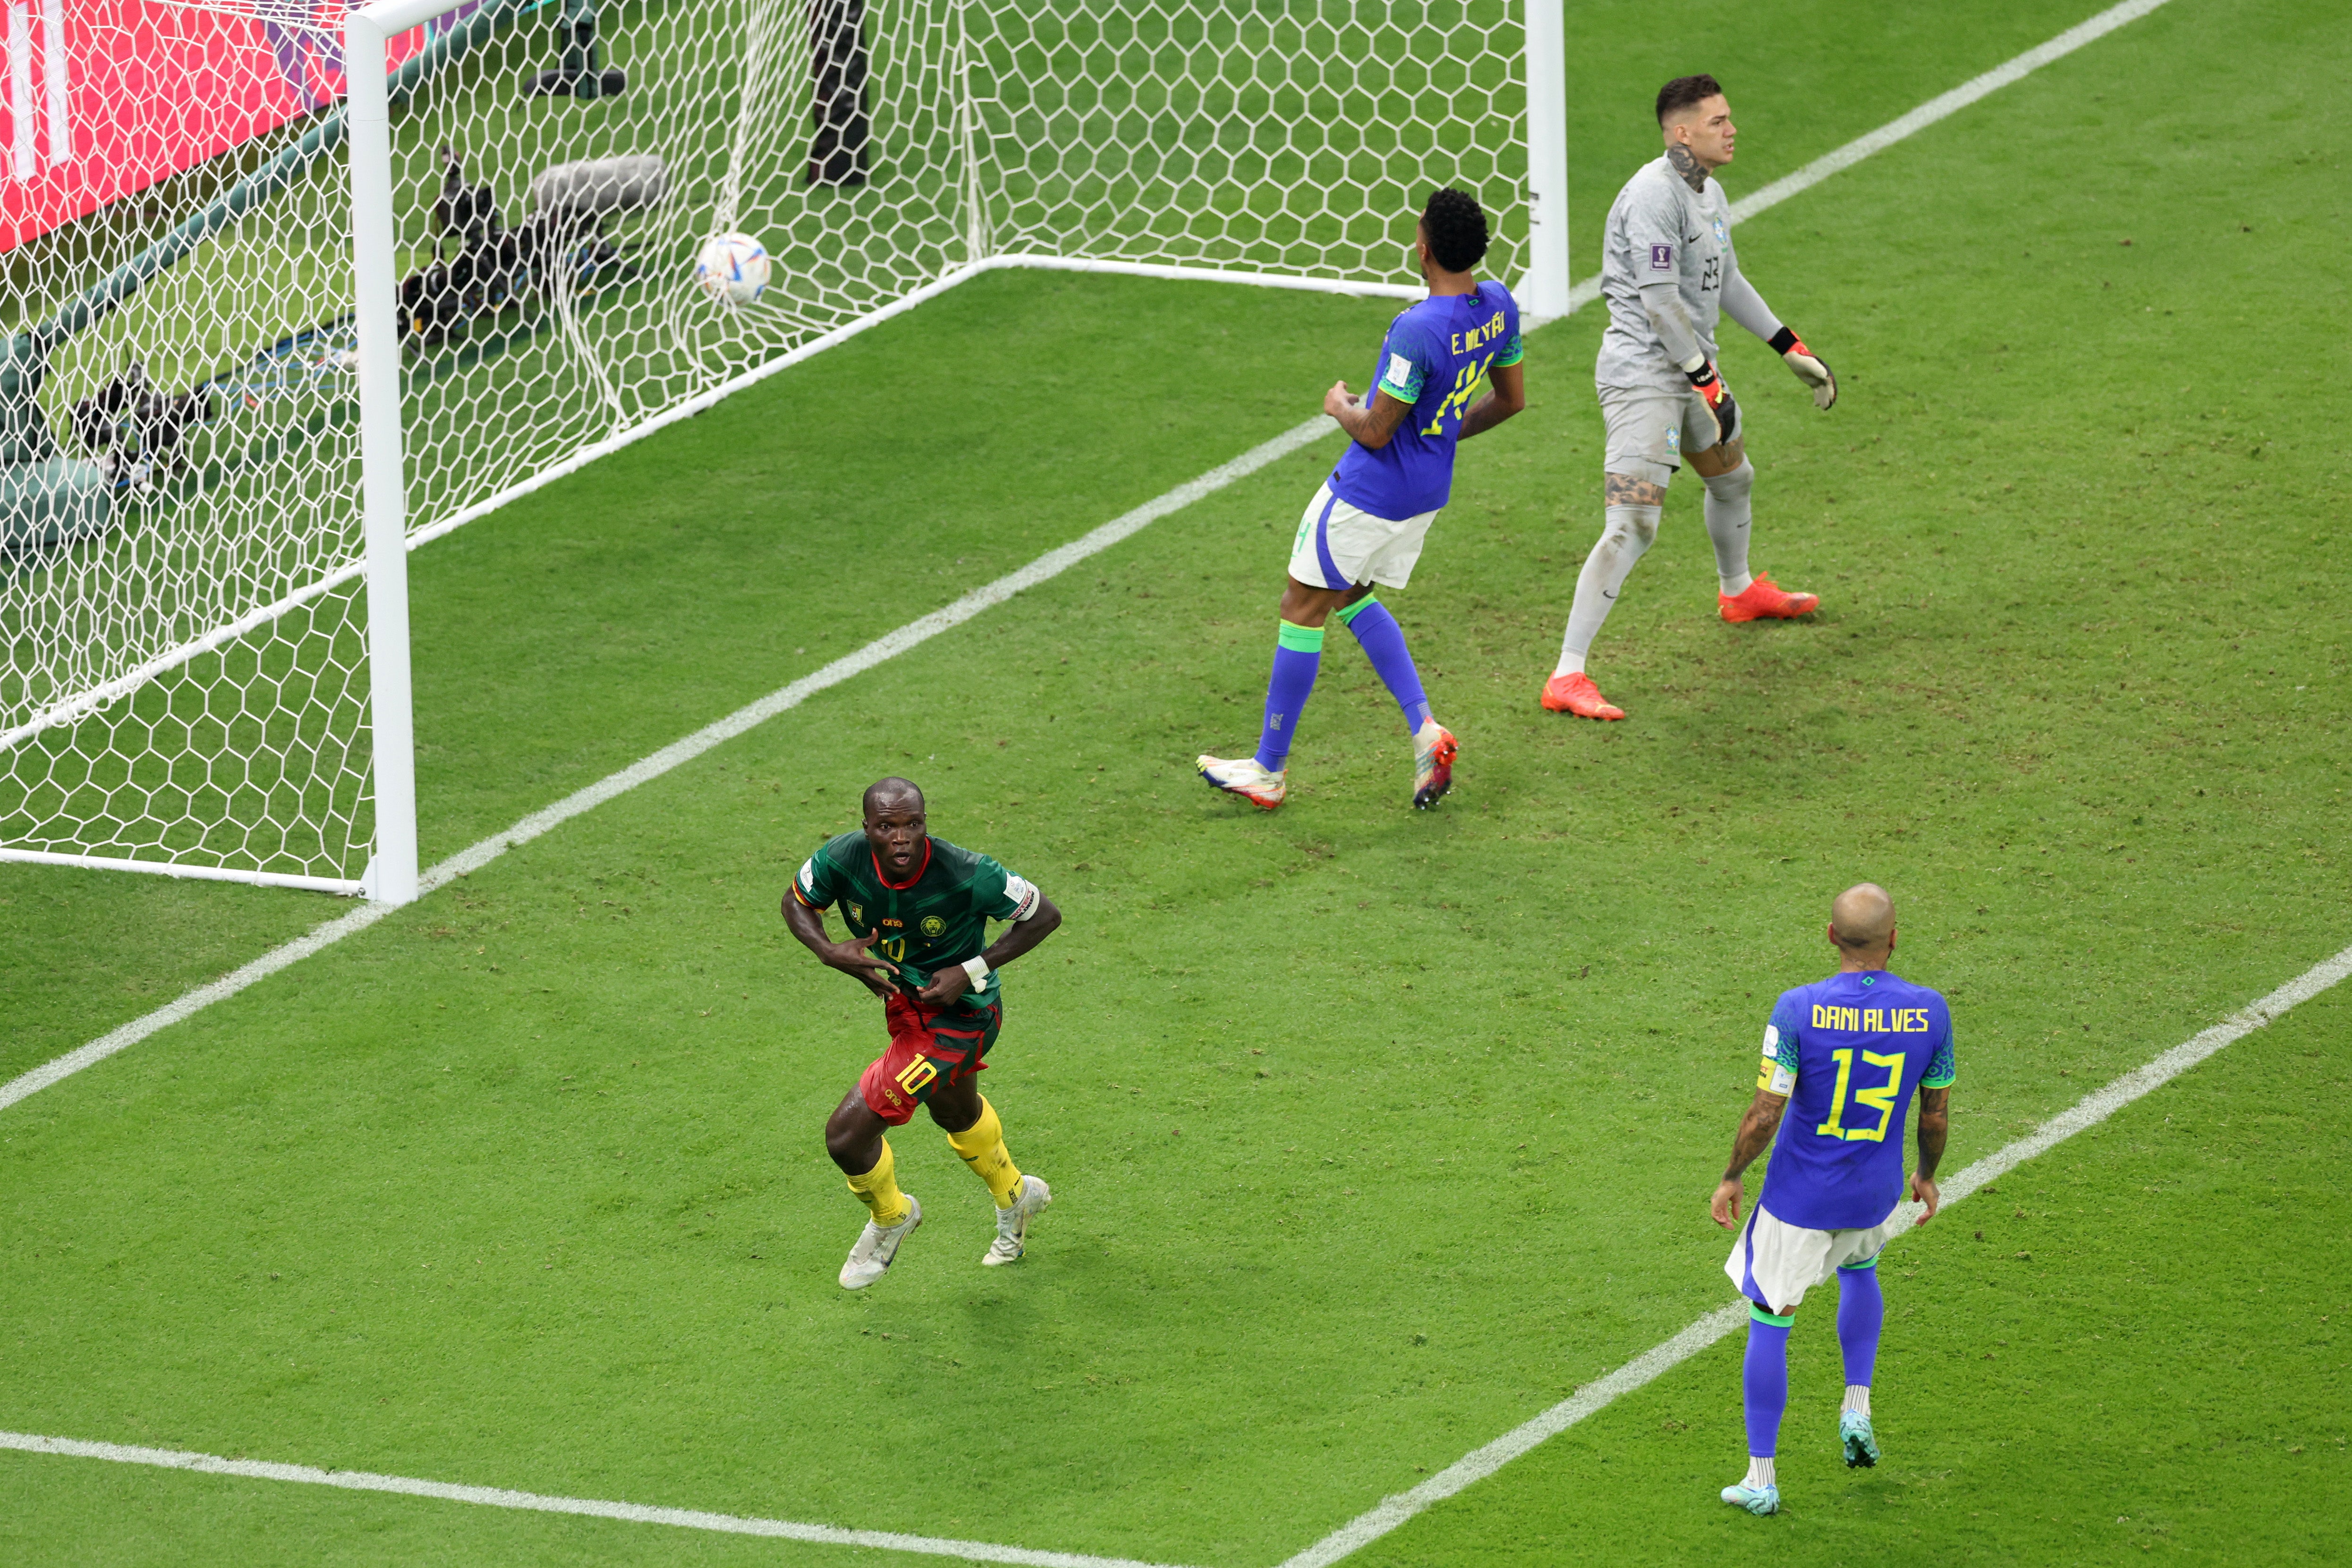 Vincent Aboubakar stunned Brazil with a stoppage-time header to win the game